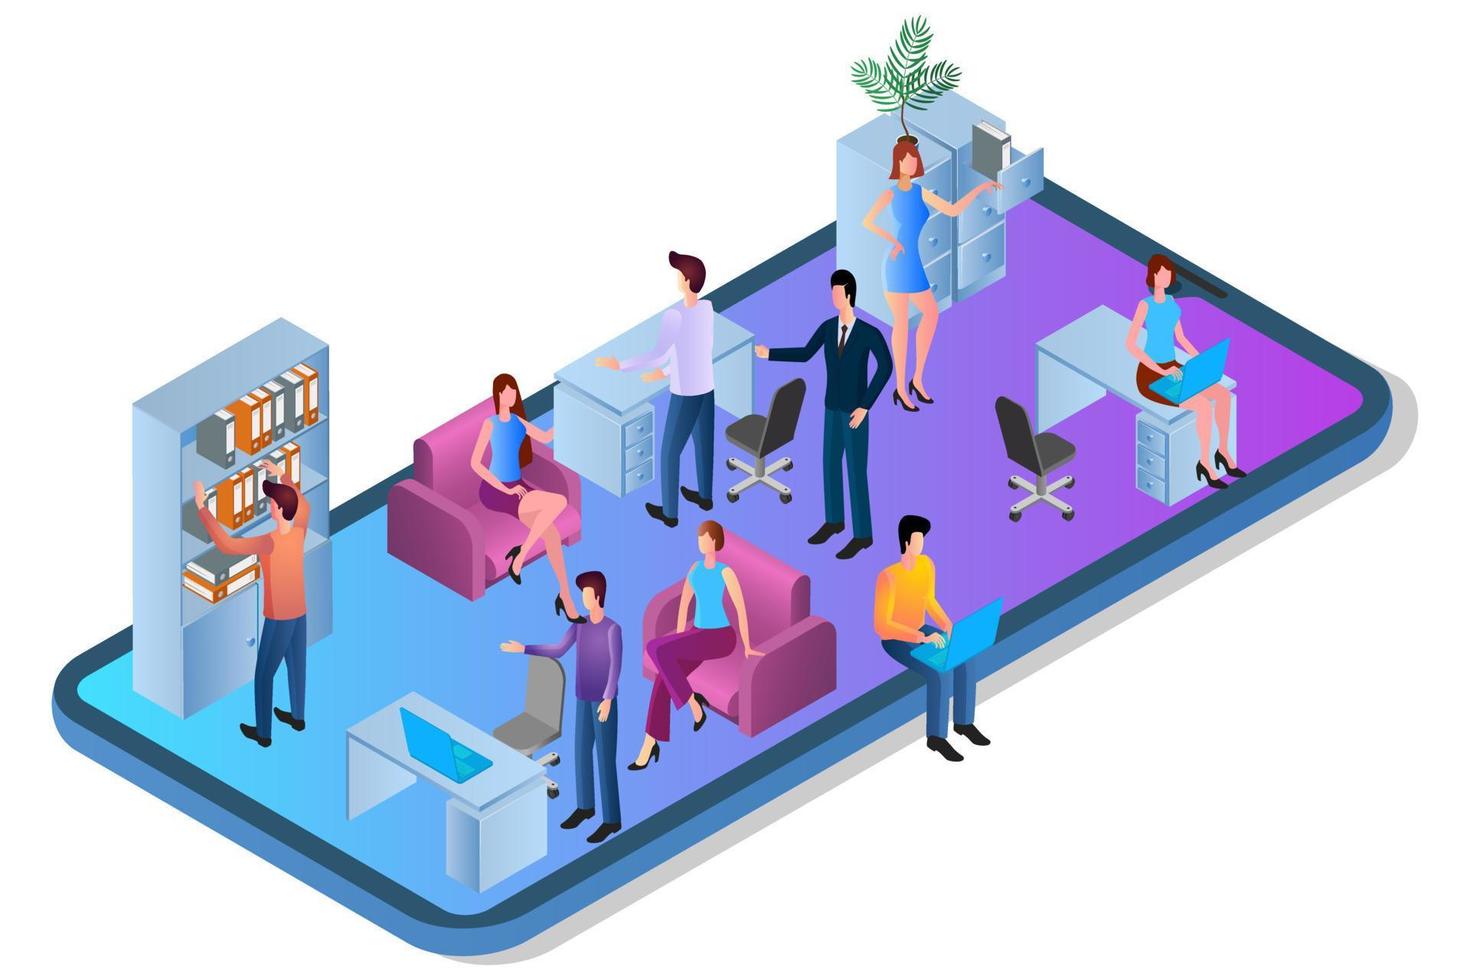 Online office.The concept of remote work.People work through an Internet connection.Teamwork and team spirit.Isometric vector illustration.